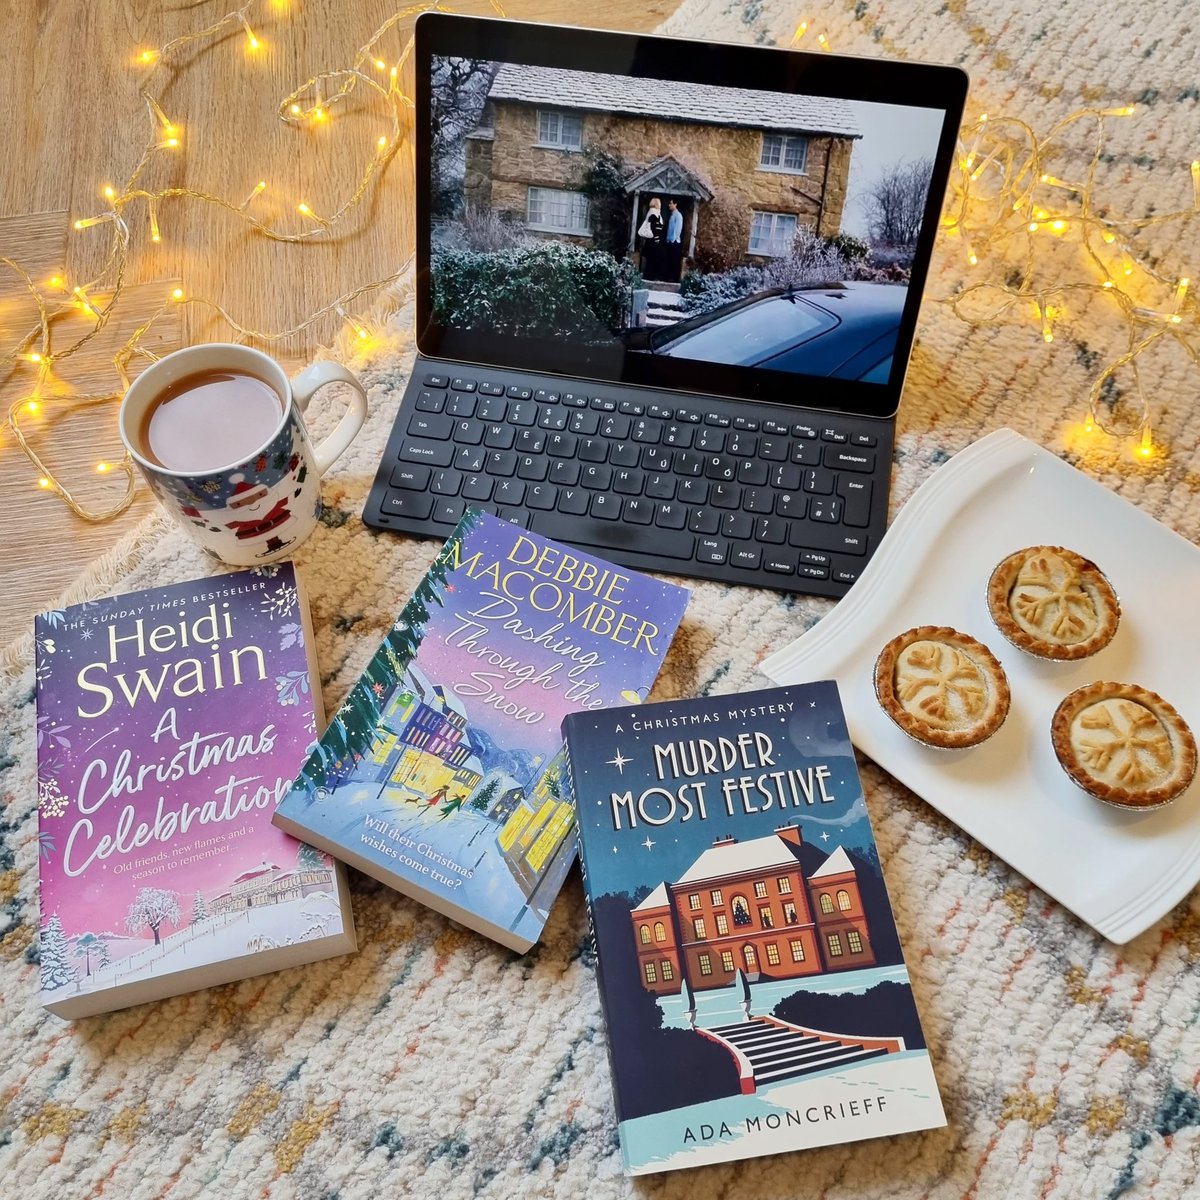 ❄️10 days until Christmas Eve❄️

Which do you prefer? The excitement of Christmas Eve or the glorious chaos of Christmas Day? 🎄

#booktwt #books #bookblog #bookish #reading #bookblogger #christmas #christmaseve #christmasbooks #festive